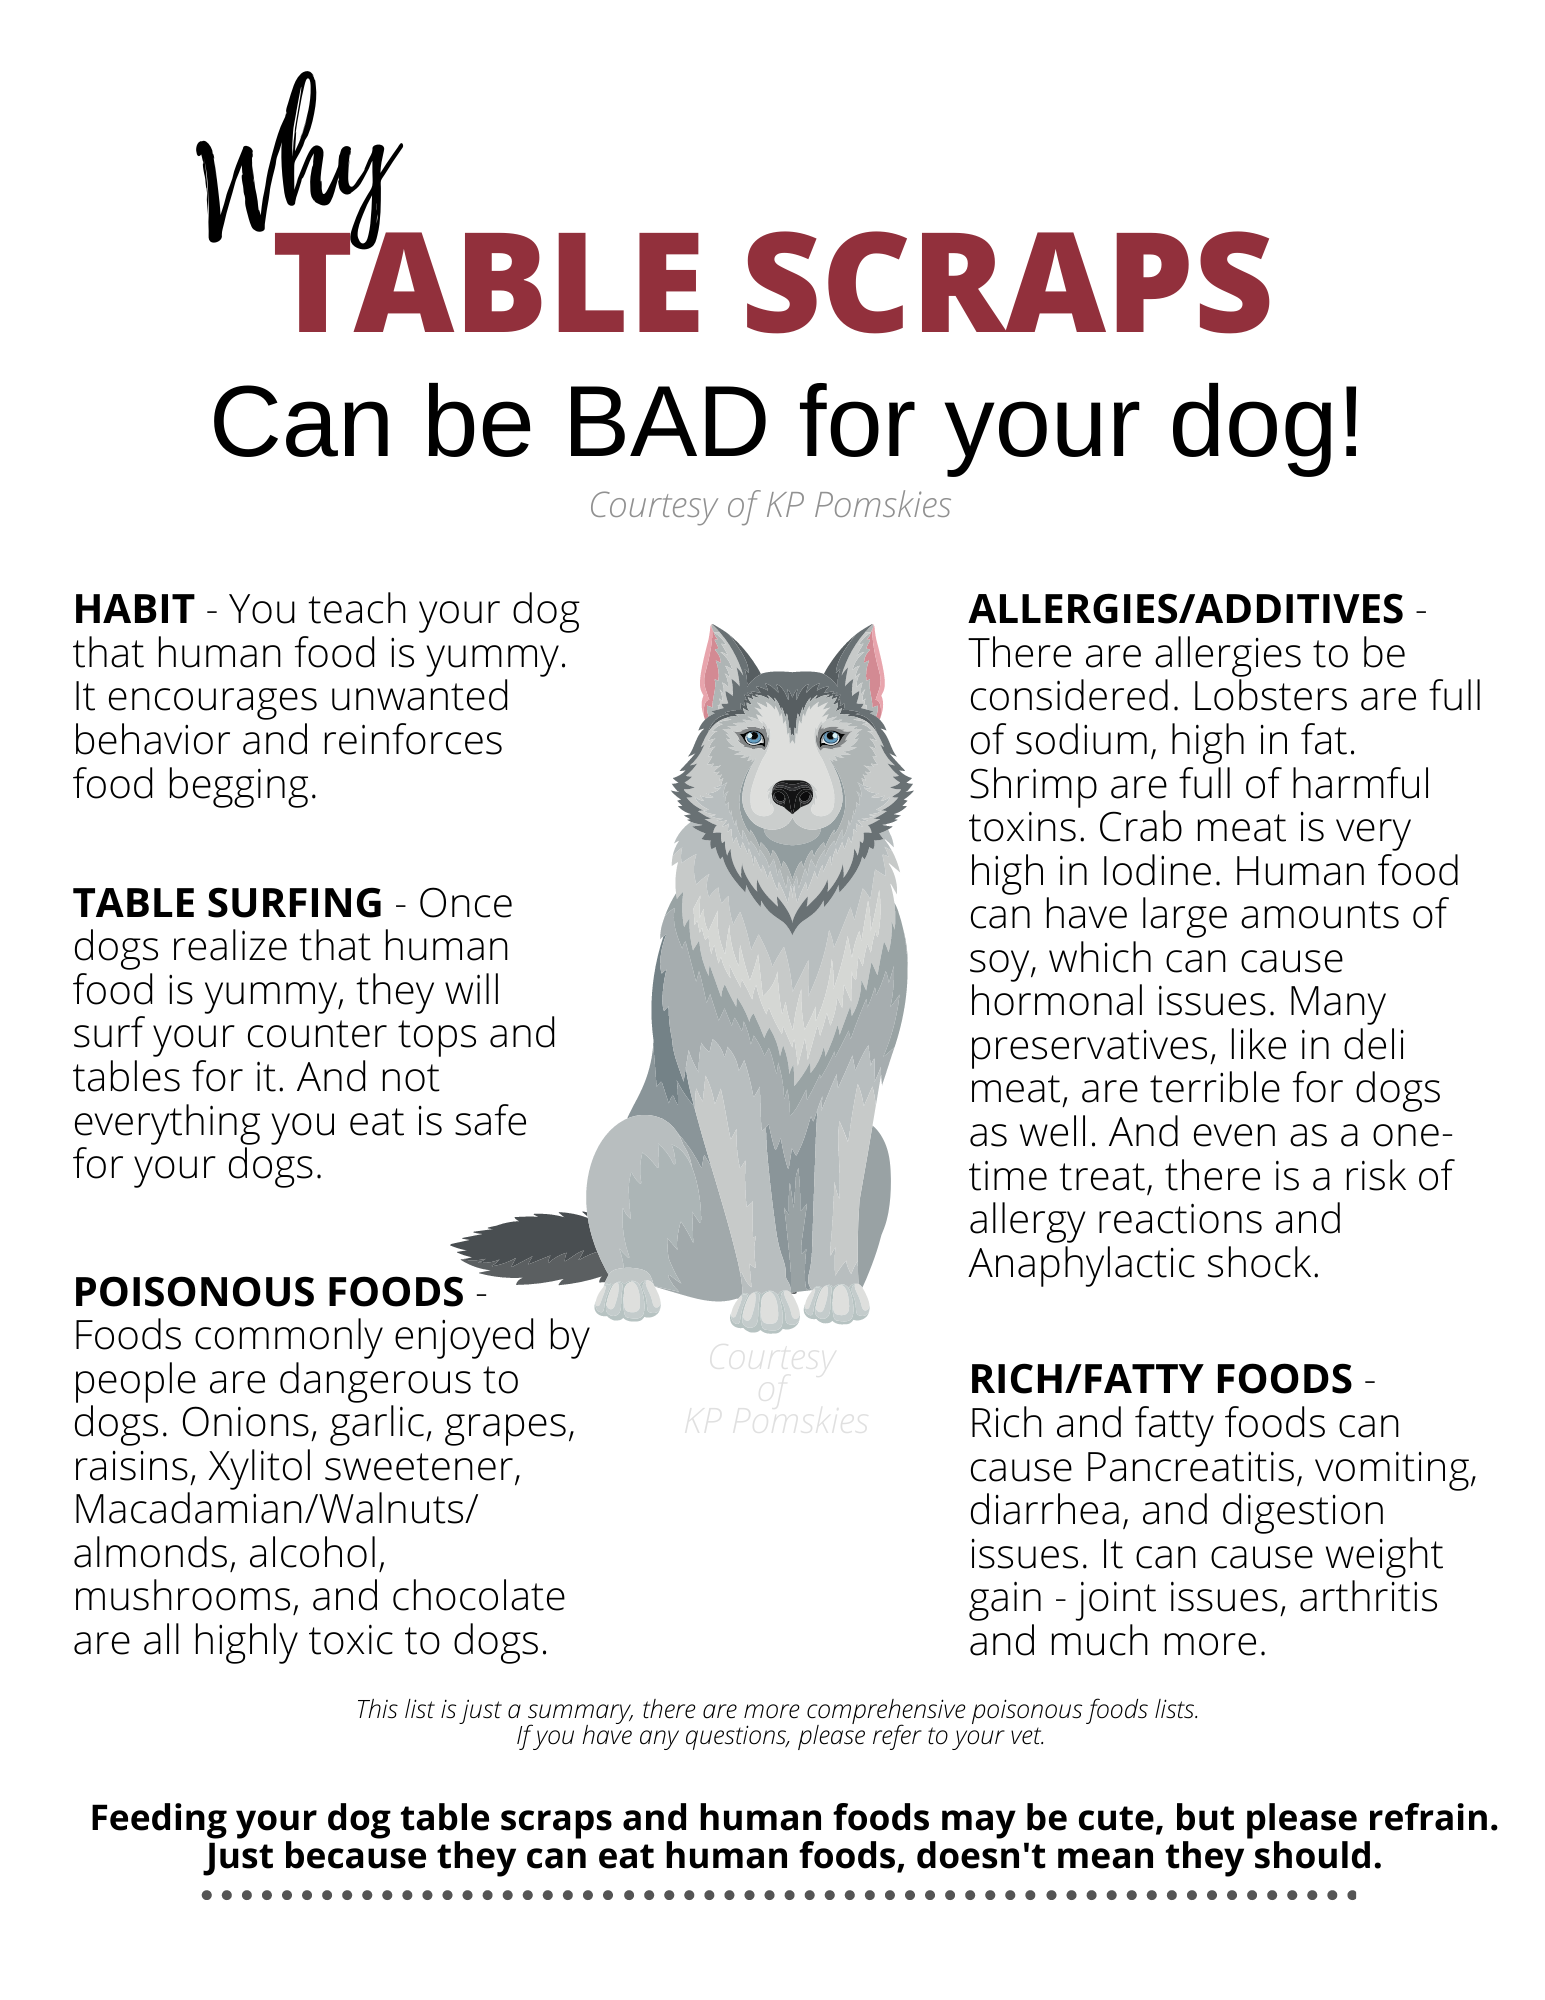 can dogs eat human food instead of dog food